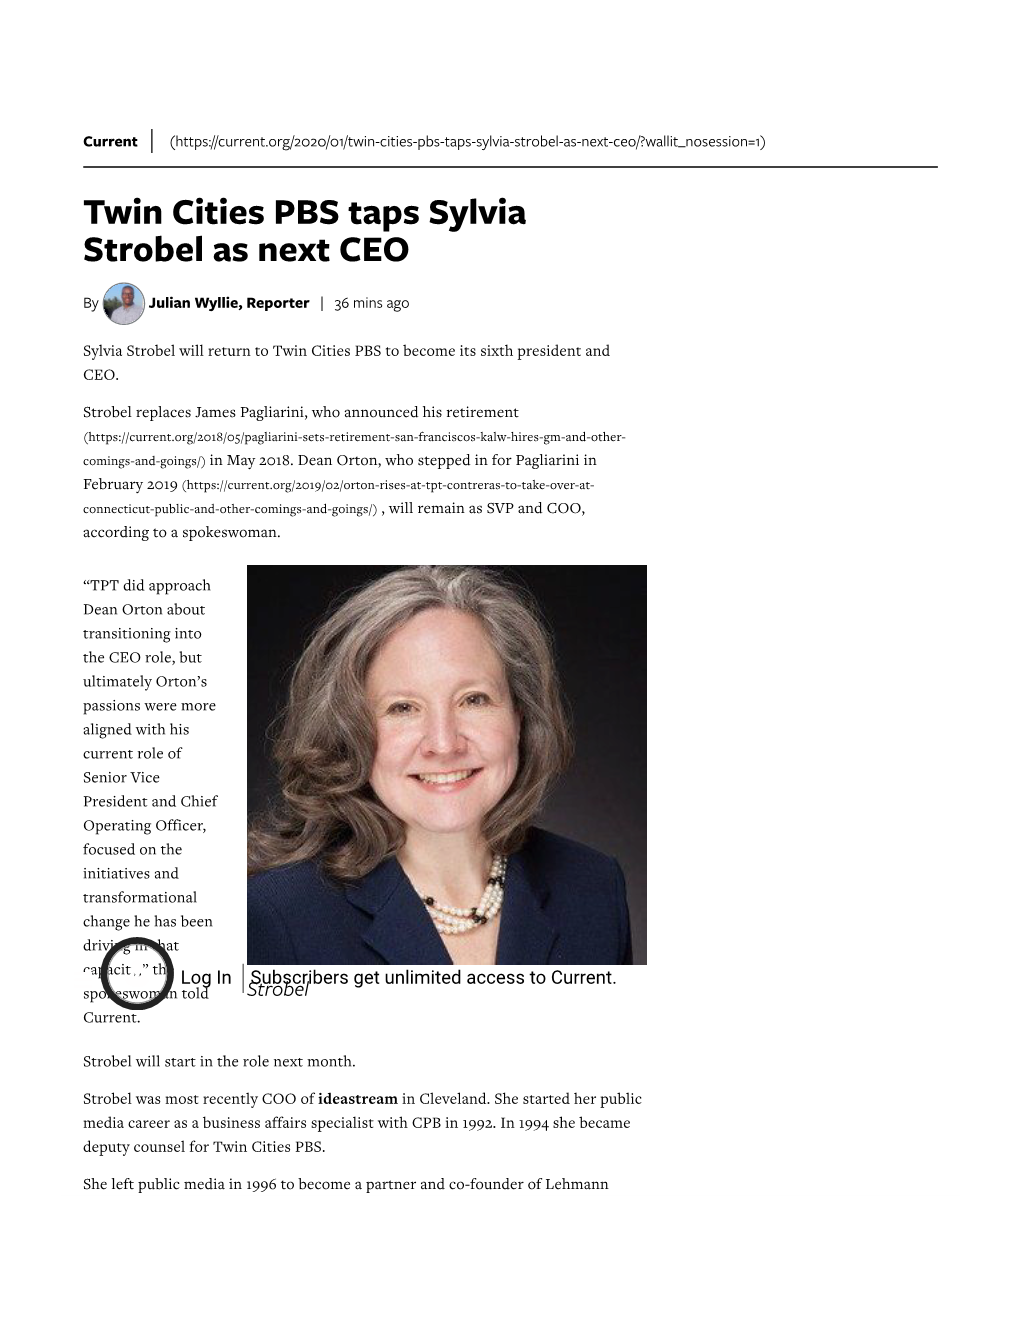 Twin Cities PBS Taps Sylvia Strobel As Next CEO | Current